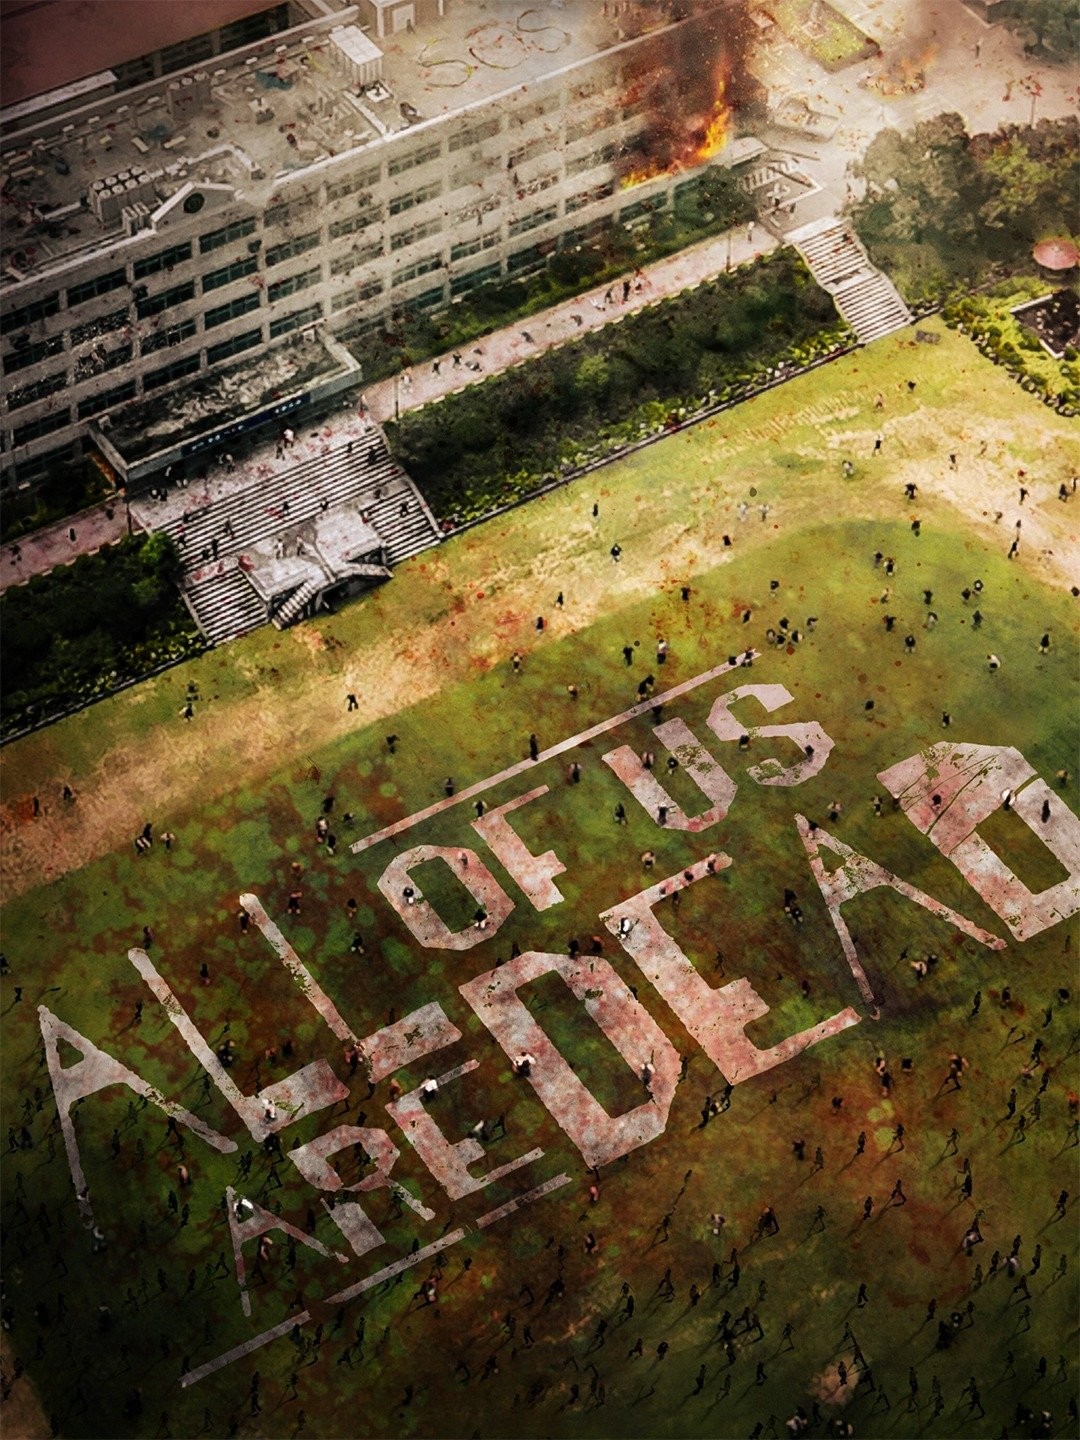 Netflix's 'All Of Us Are Dead' – Is There a Season 2 Release Date?  Everything We Know So Far, All Of Us Are Dead, Netflix, Television